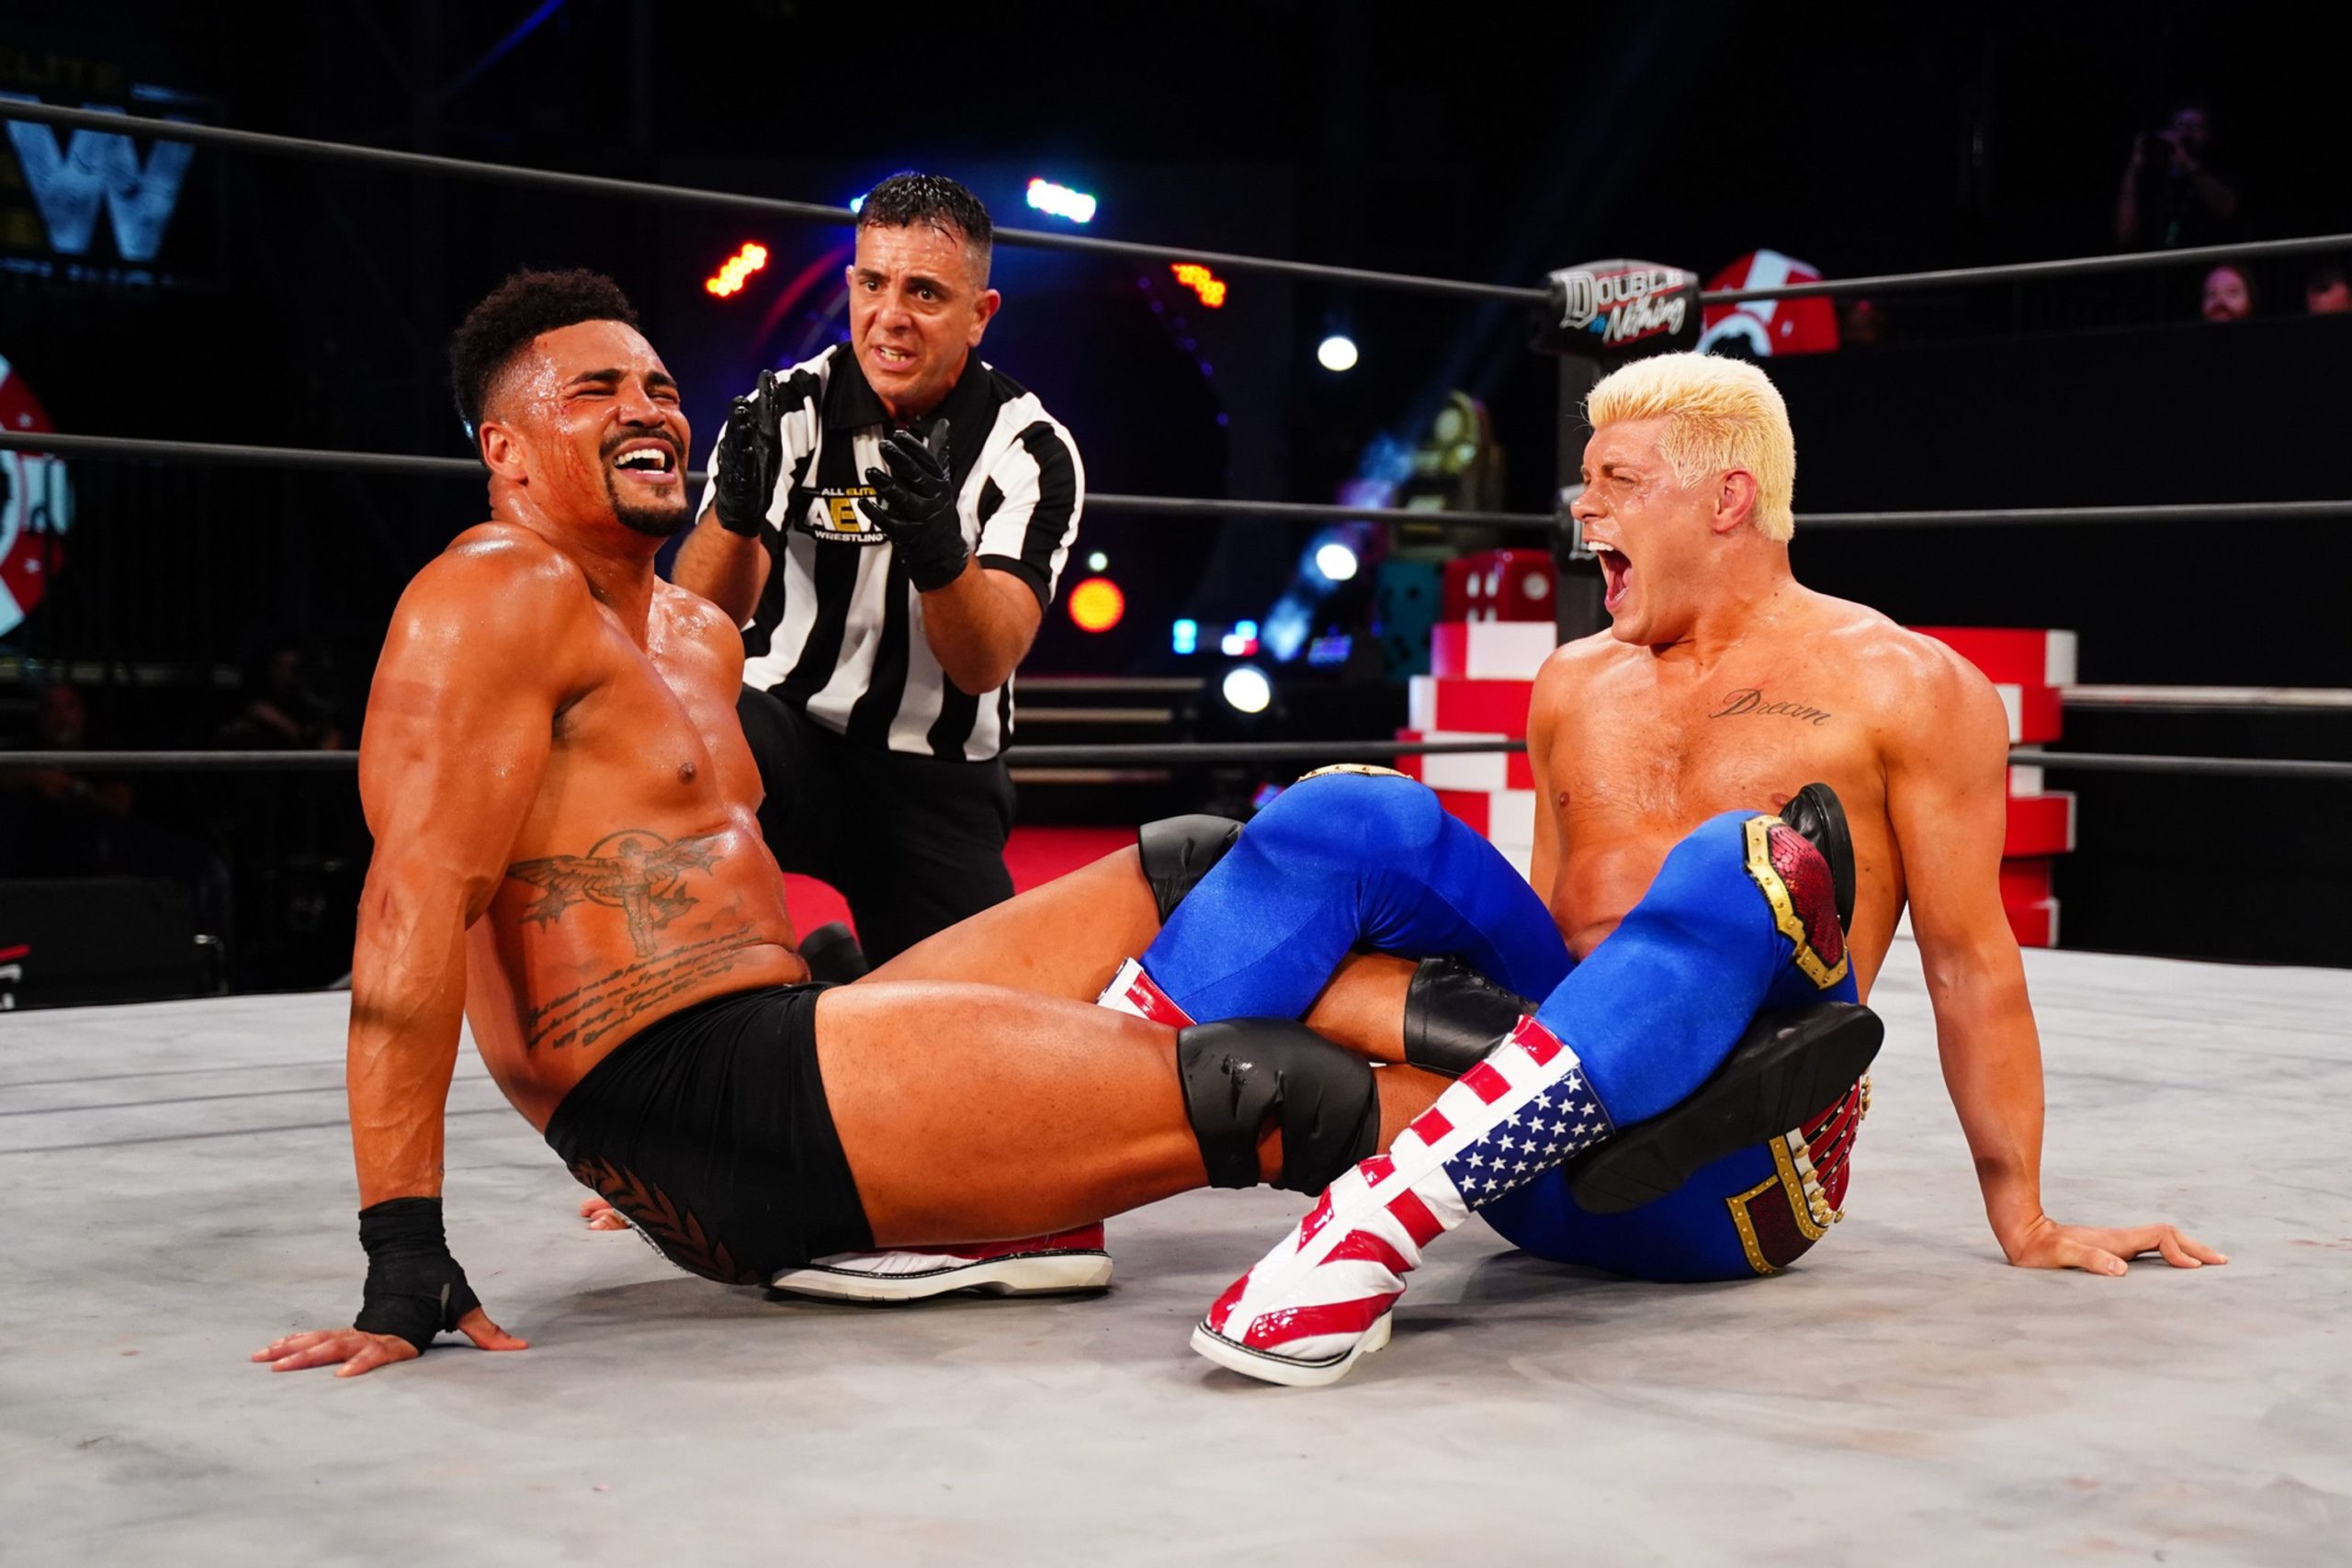 Anthony Ogogo Believes He Should Have Won Feud With Cody Rhodes